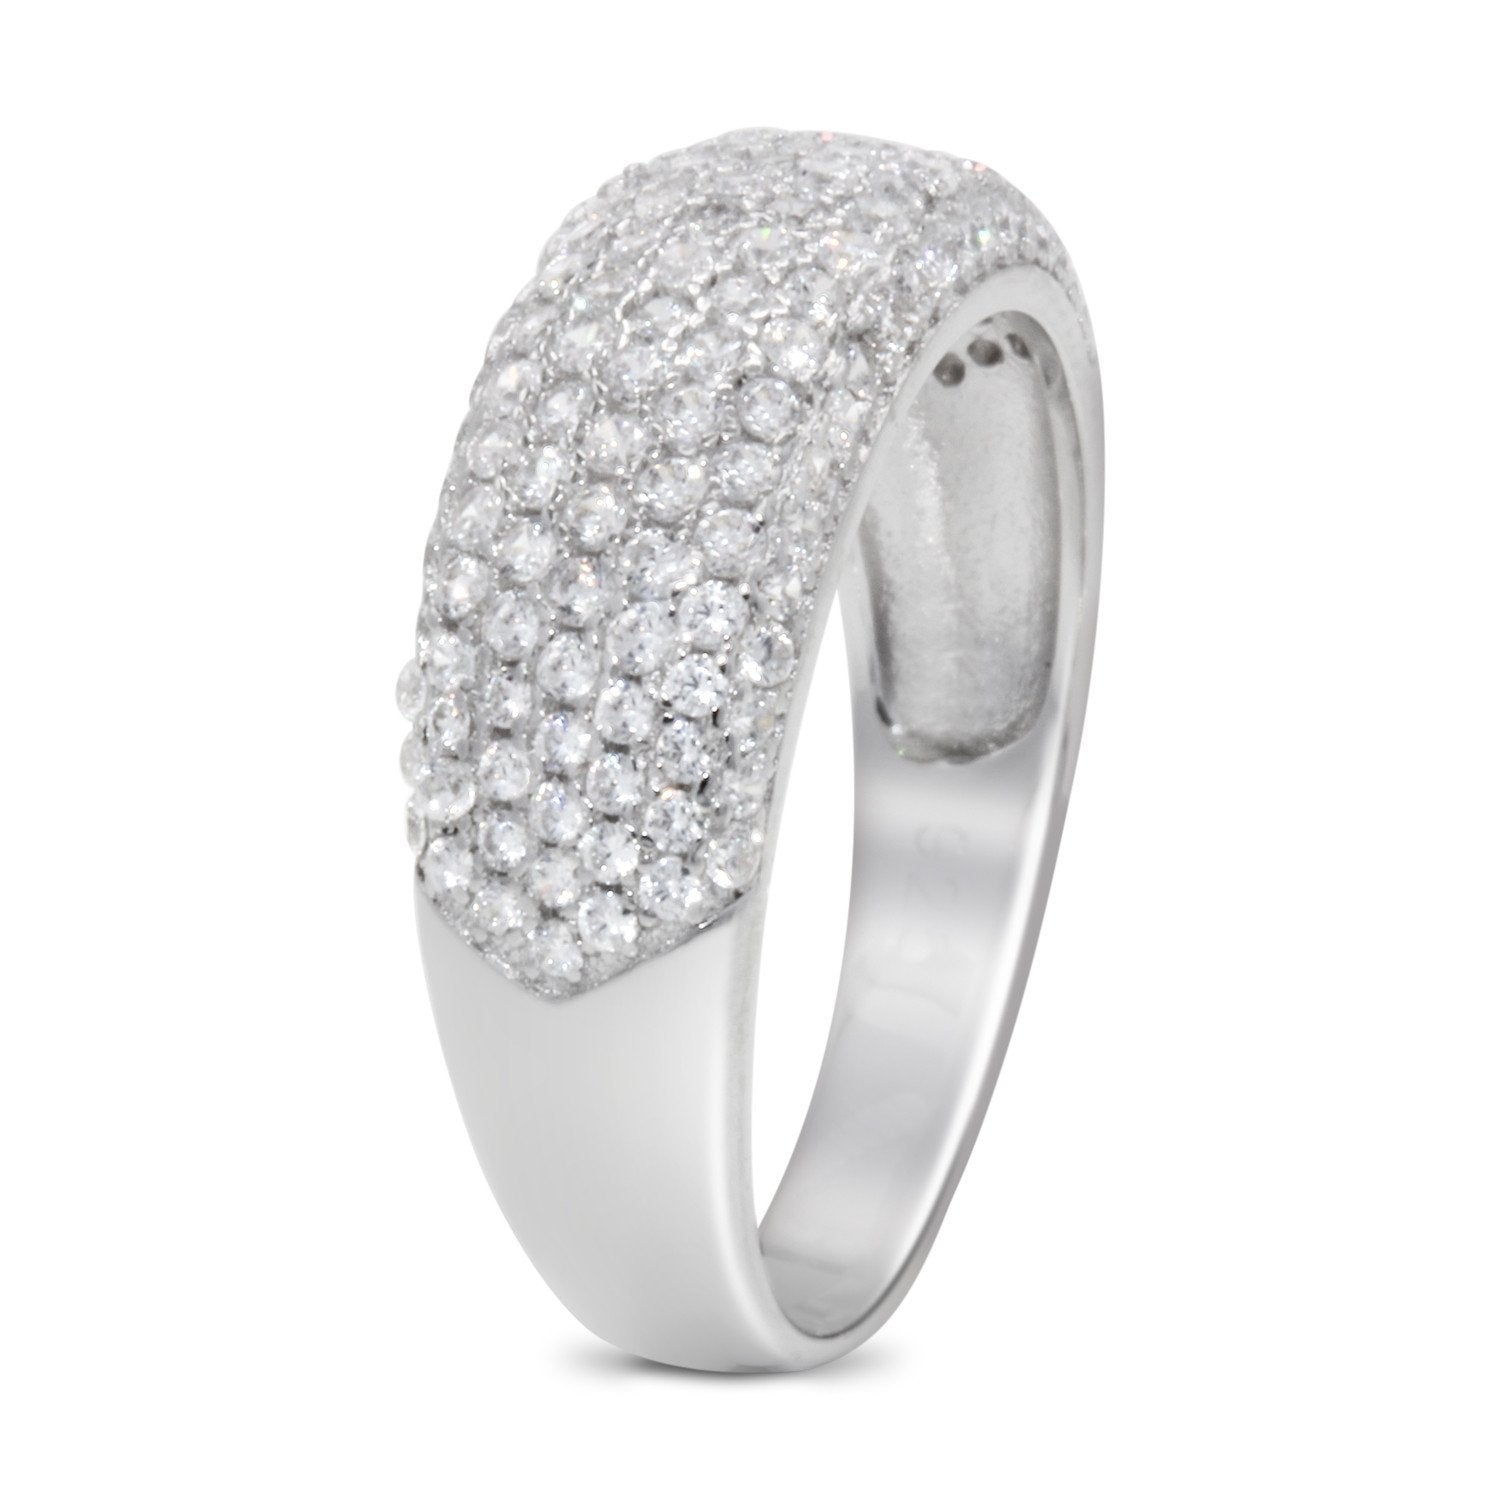 CZ 5mm Sterling Silver Plated Diamond Stimulant Band Engagement Ring